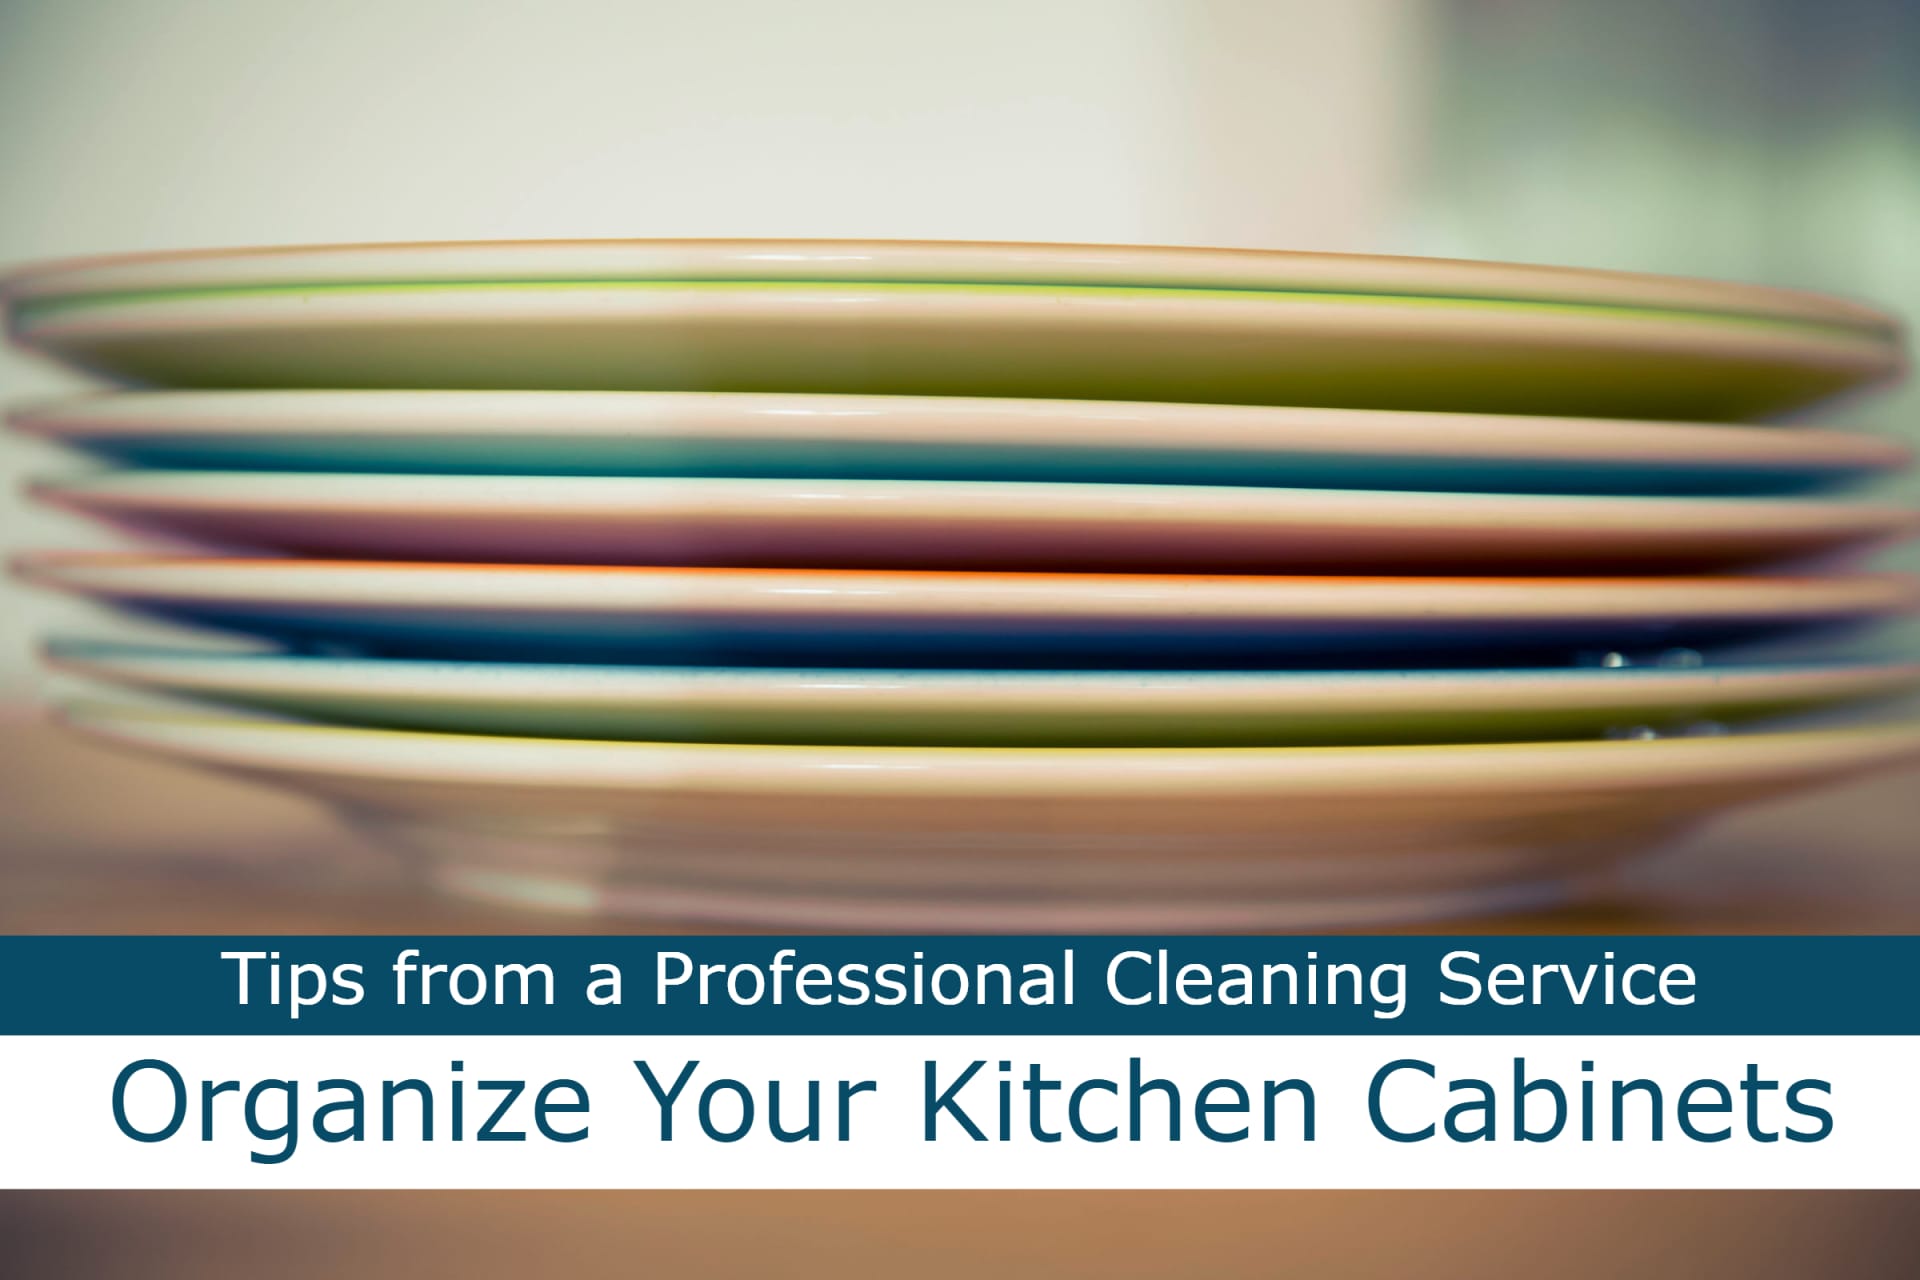 Tips from a Cleaning Service: Reorganize Your Kitchen Cabinets